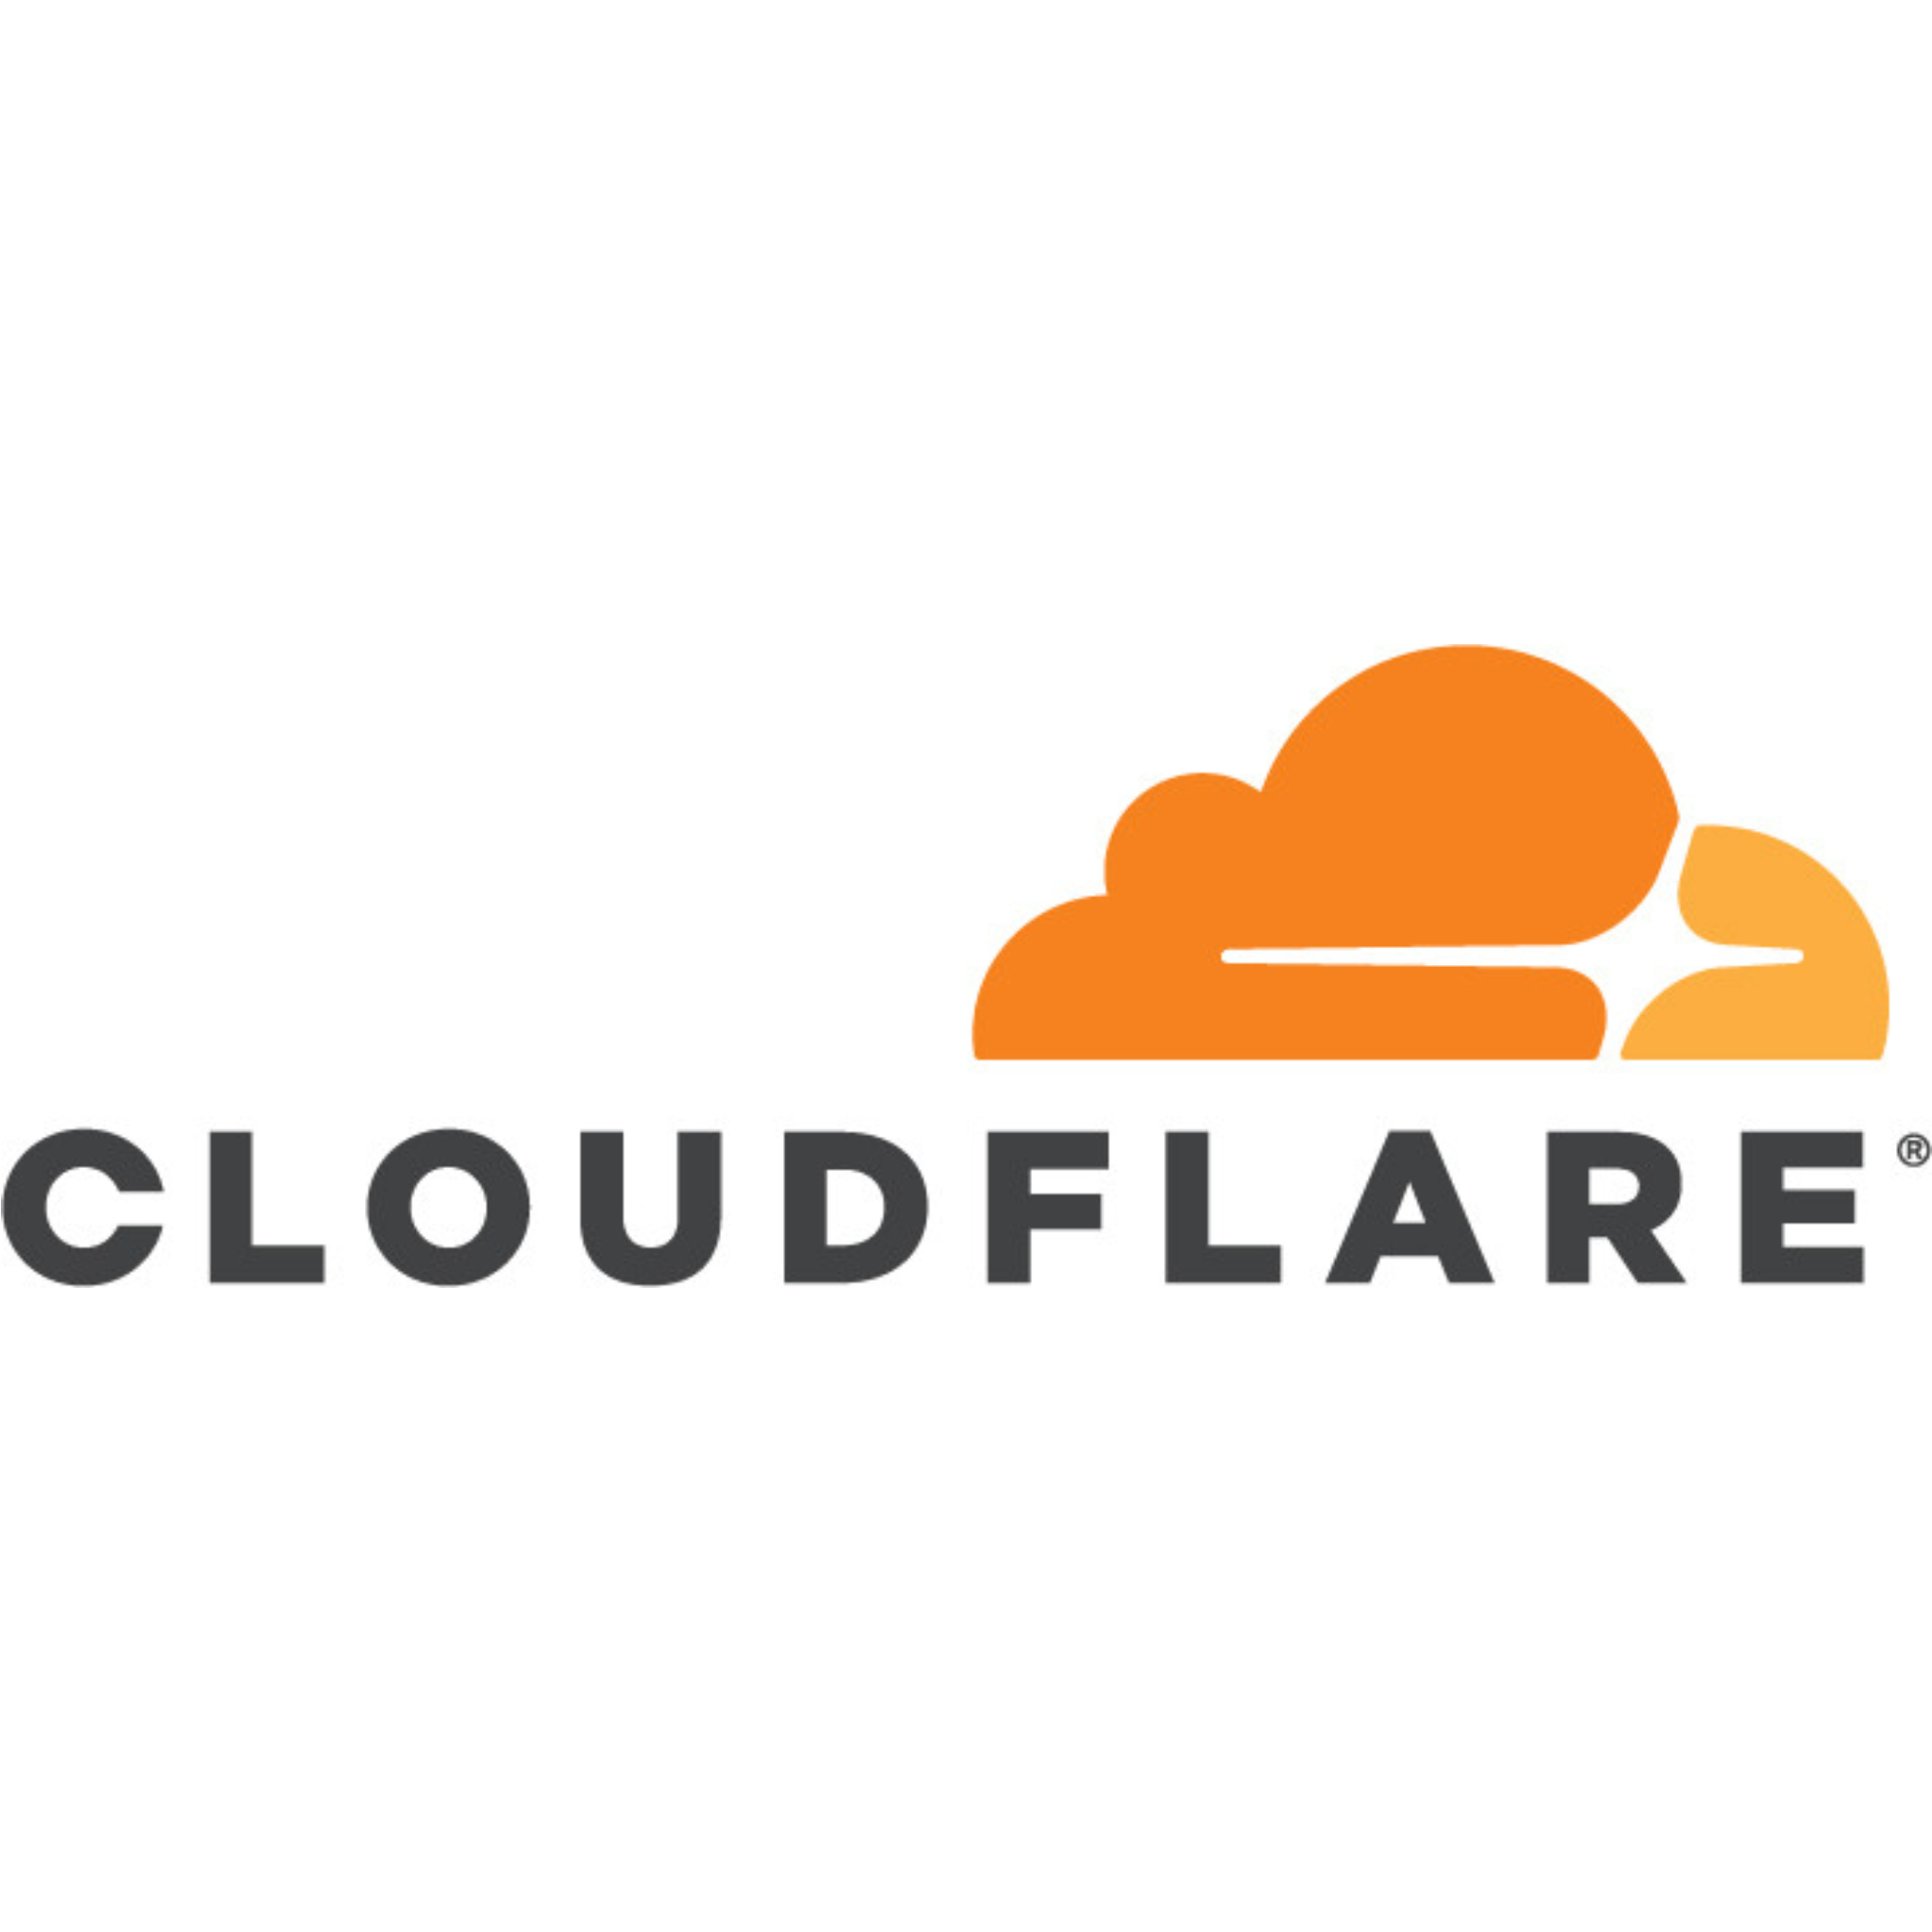 Cloudflare Named to Top 100 Most Loved Workplaces in 2022 by Newsweek-thumnail